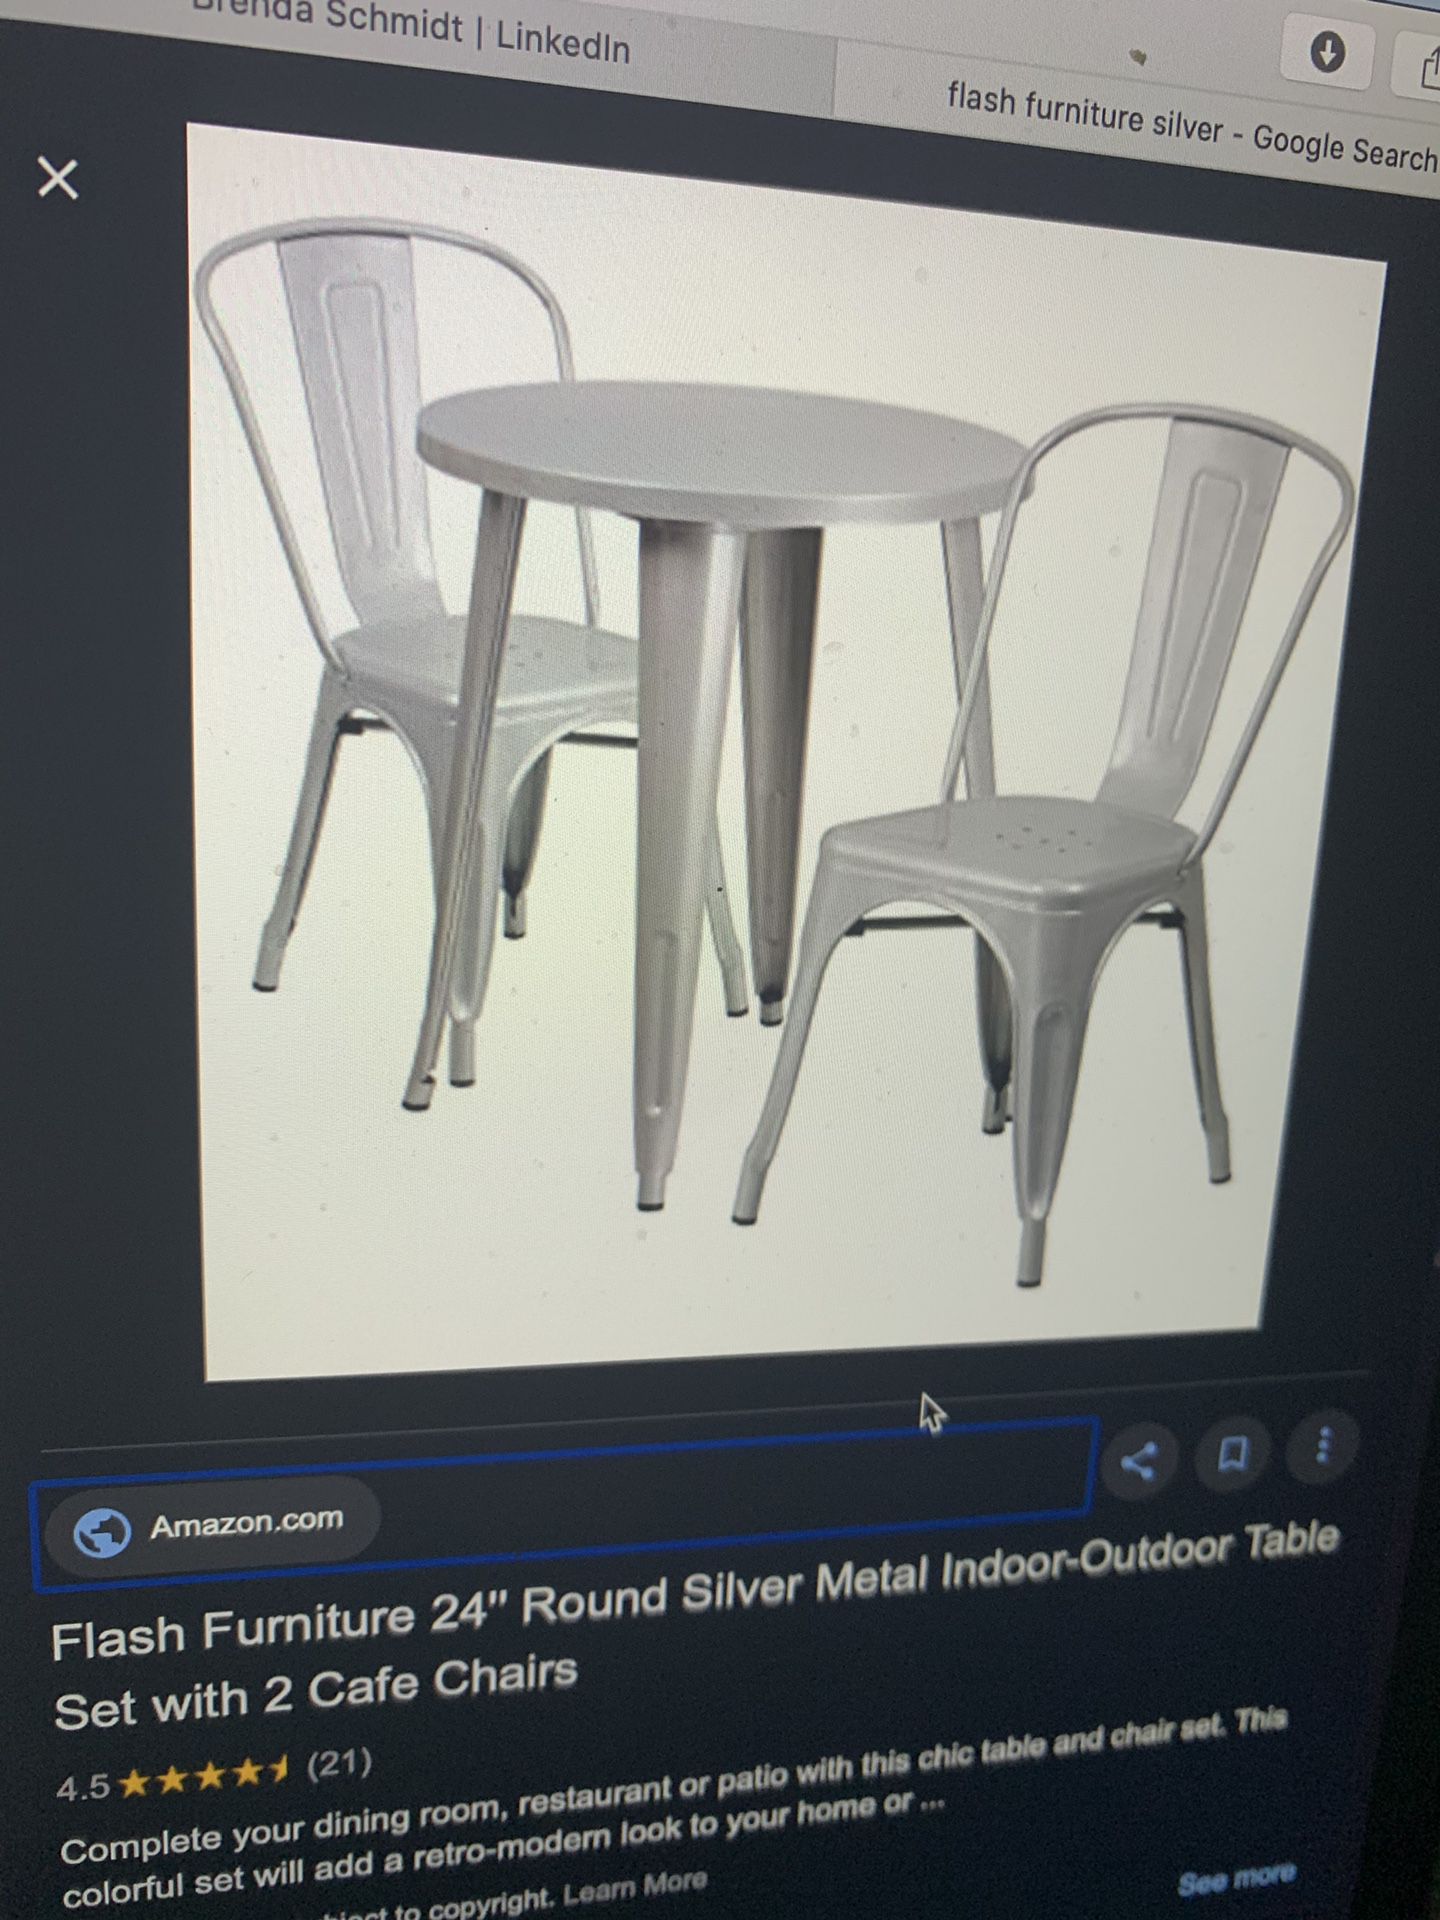 New in box Silver Metal table with chairs